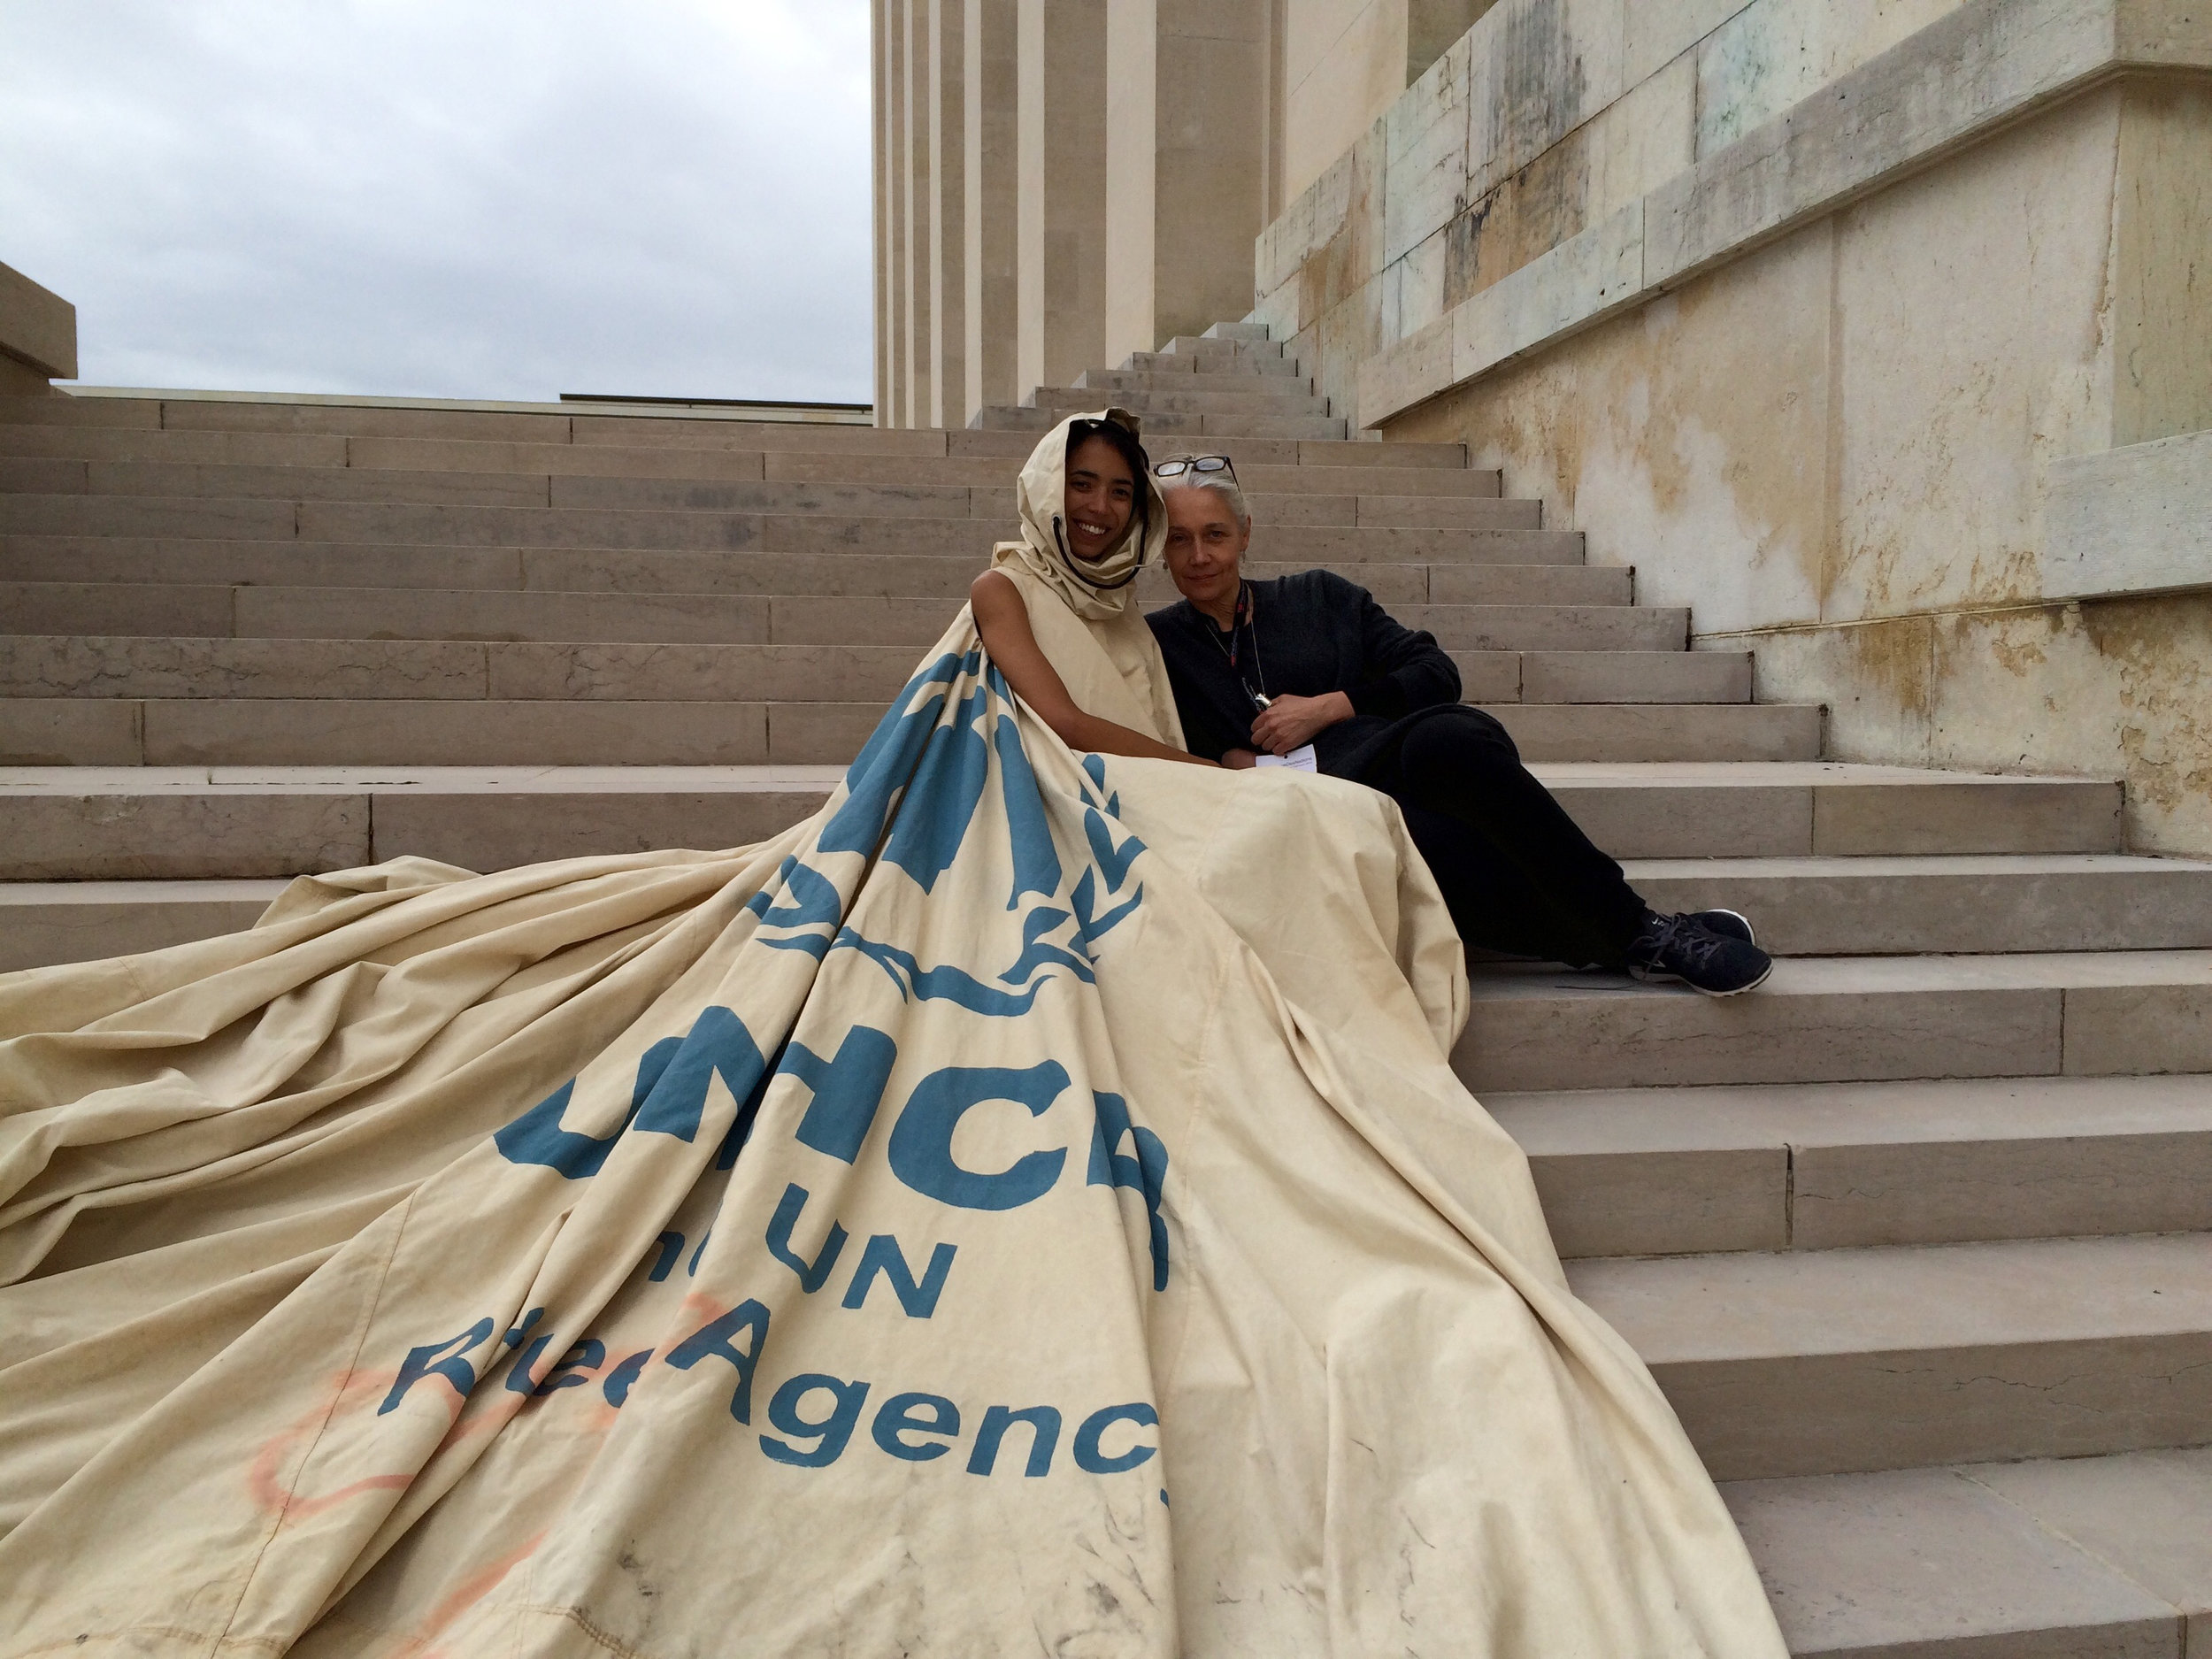  Dress For Our Time - On the steps of the UN Geneva 